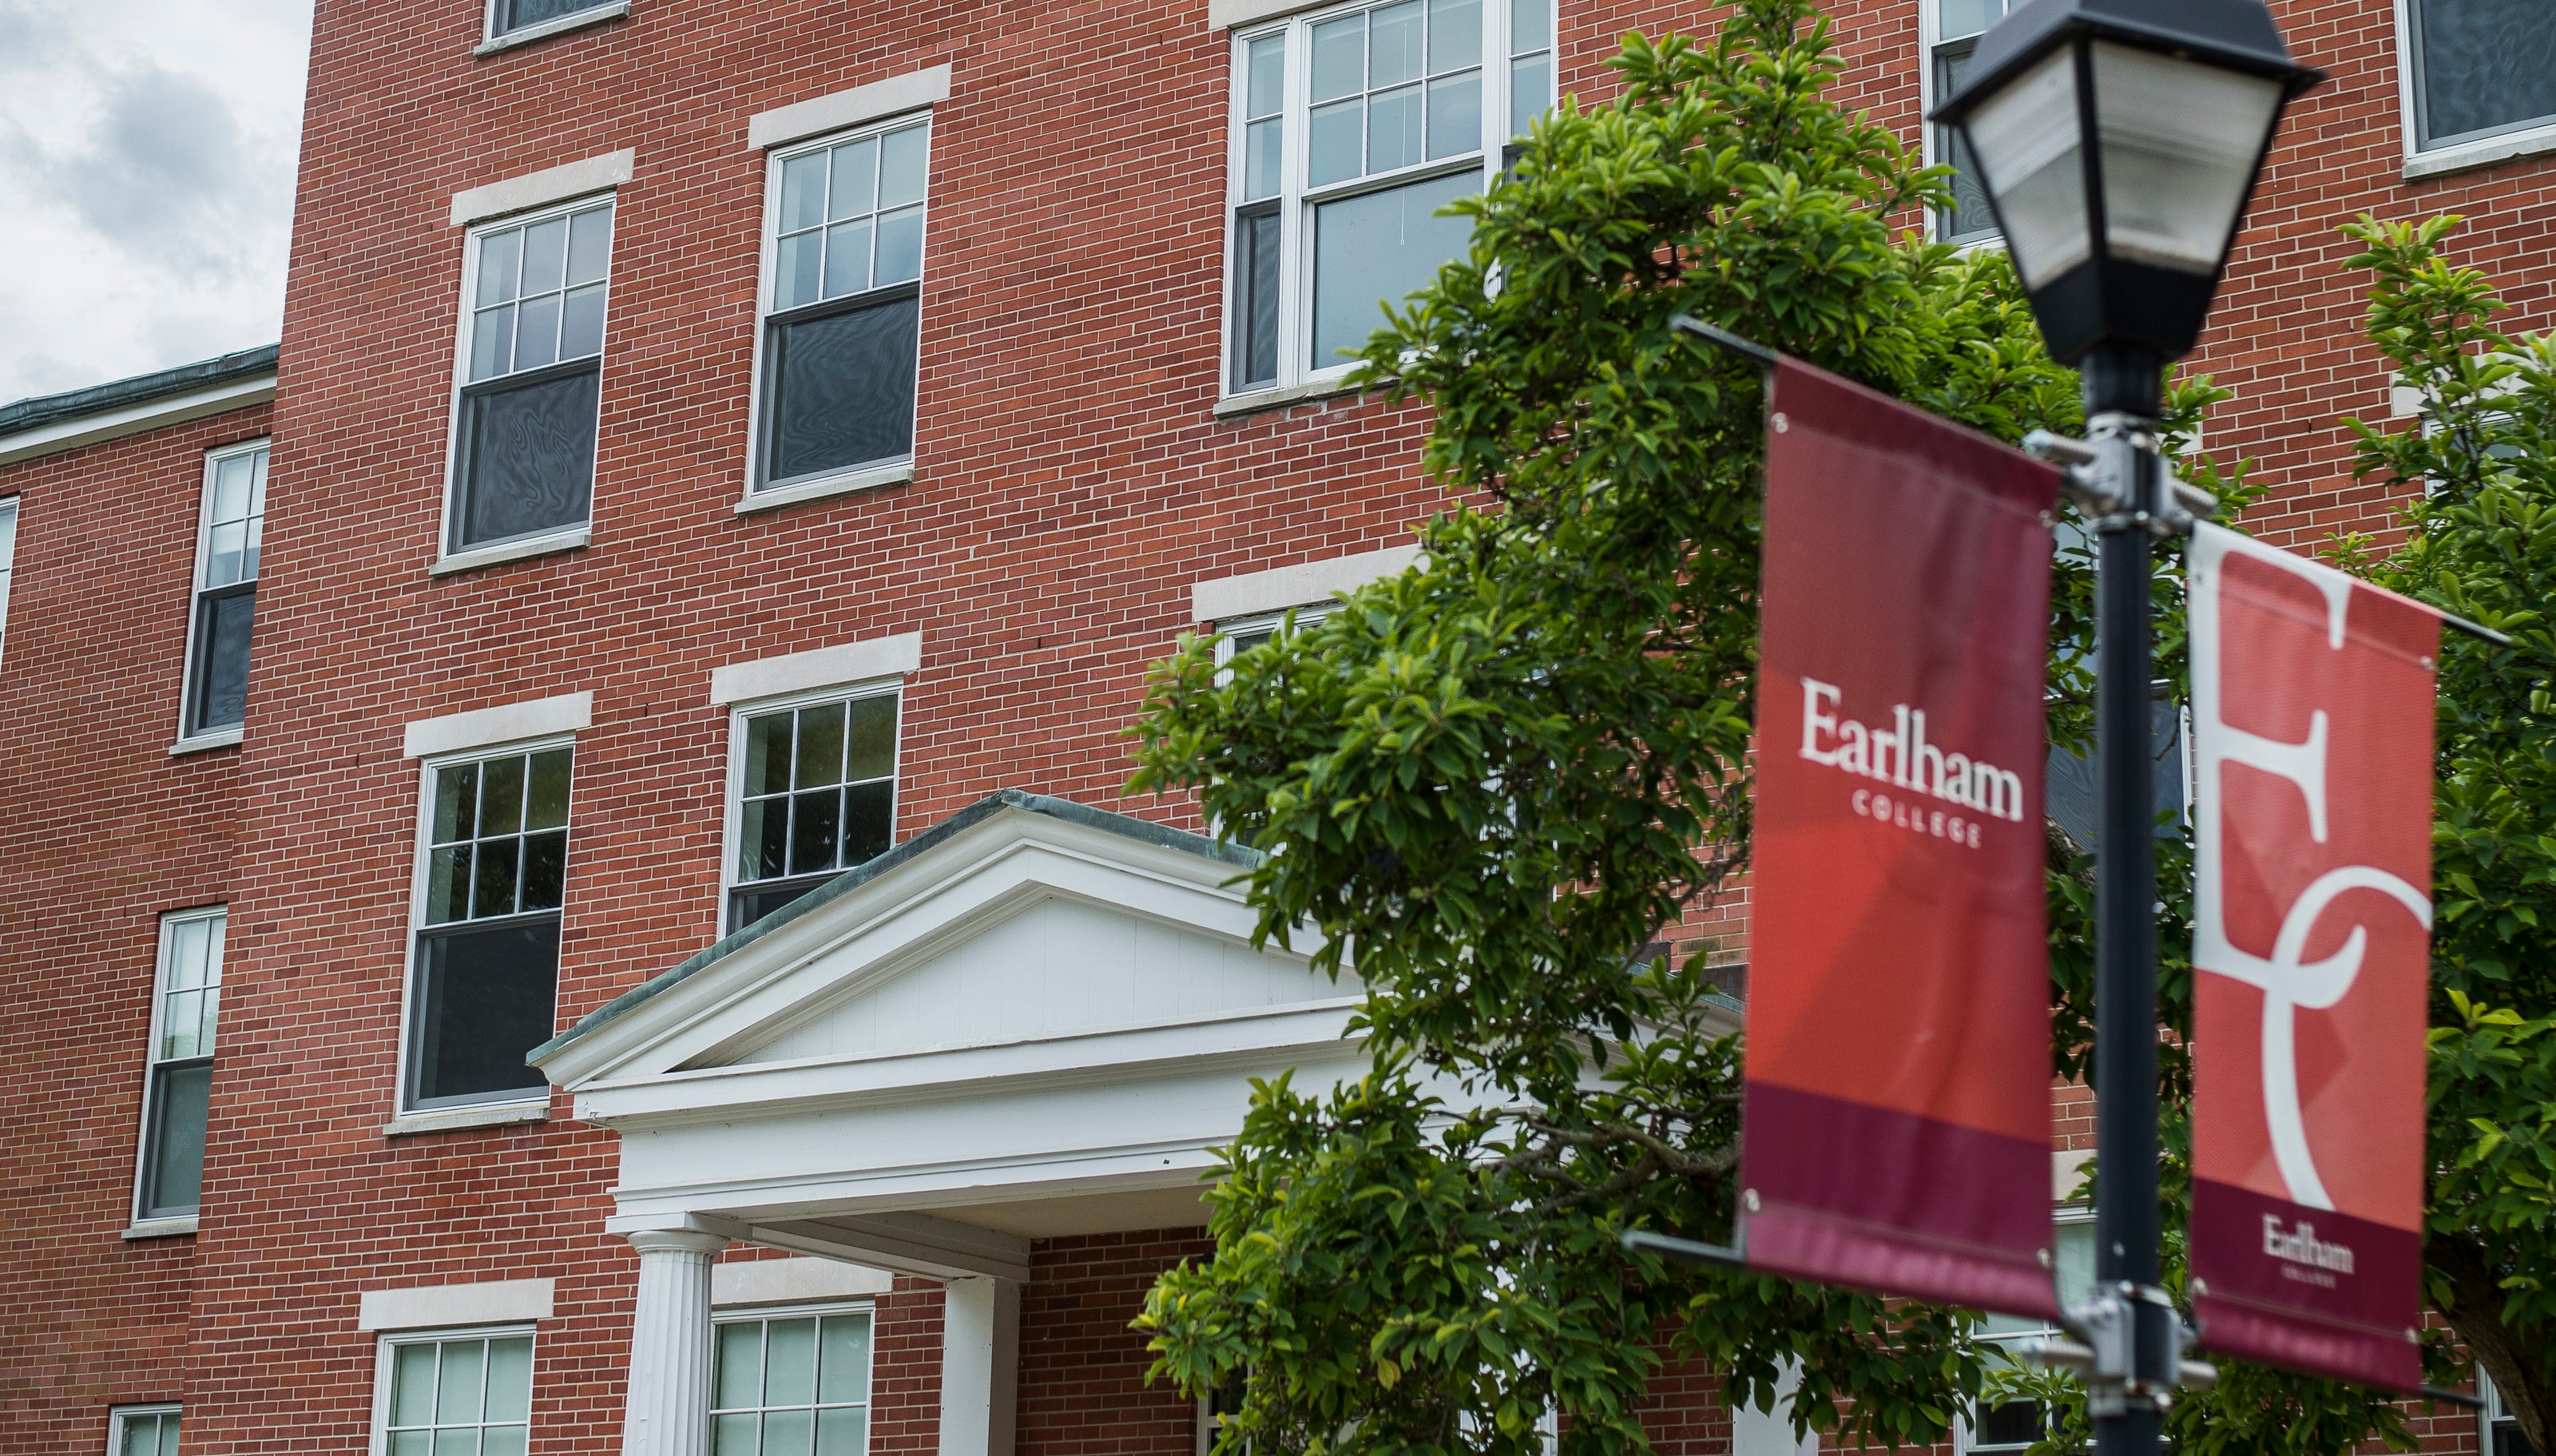 Earlham College making $7.6M in budget cuts, suspending 4 sports